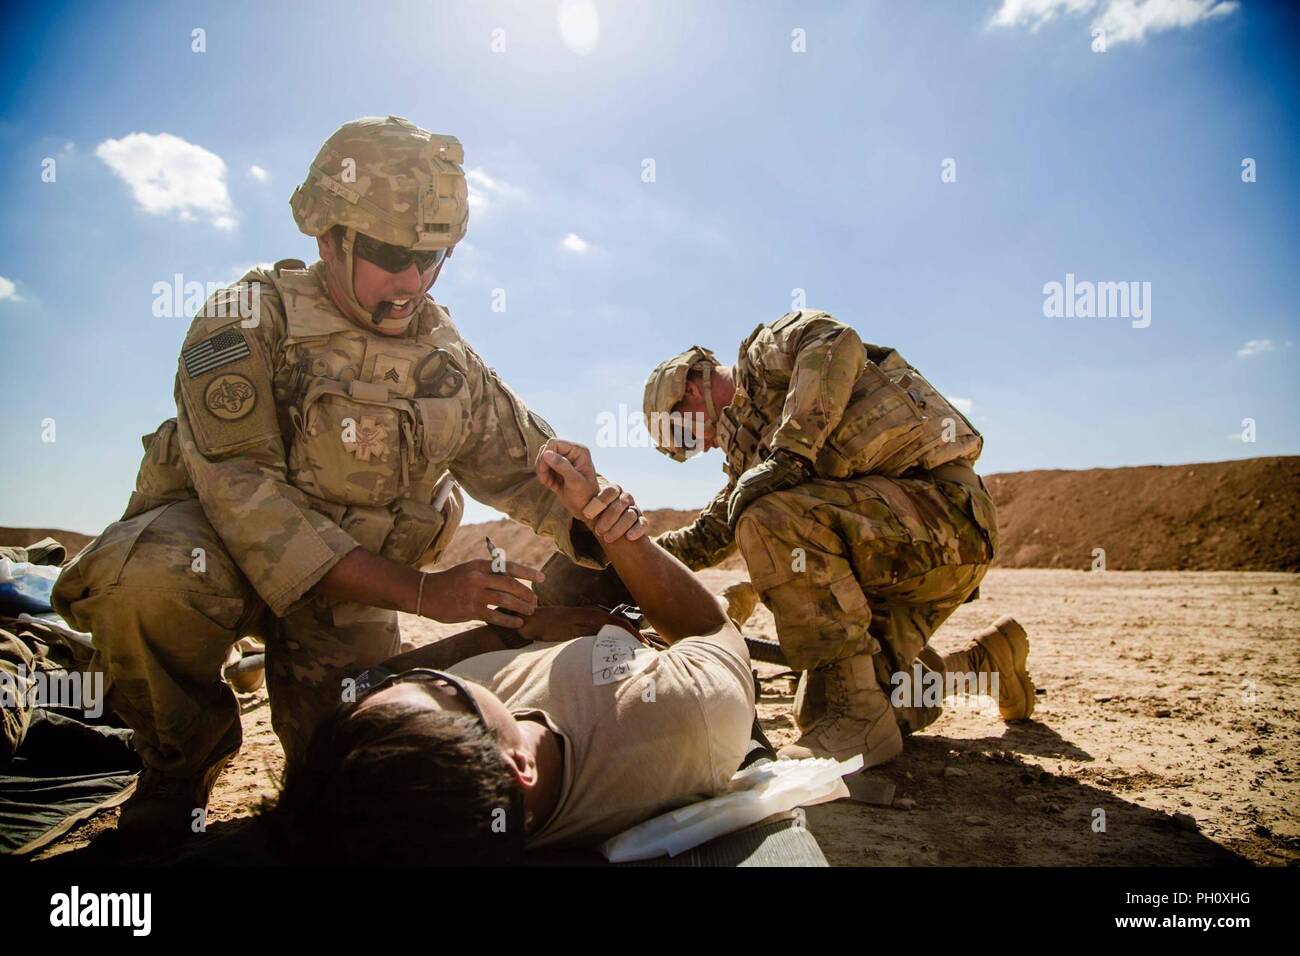 U.S. Army Sgt. Joshua Padilla, 3rd Cavalry Regiment, writes vital information on a simulated casualty during a mass casualty exercise near the Iraqi-Syrian border, June 20, 2018. Iraqi Security Forces and Coalition partners provided fire support and continually work on combat skills to assist the Syrian Democratic Forces as they continued Operation Roundup, the military offensive to rid the final pockets of the terrorist organization from the Middle Euphrates River Valley in Syria. Stock Photo